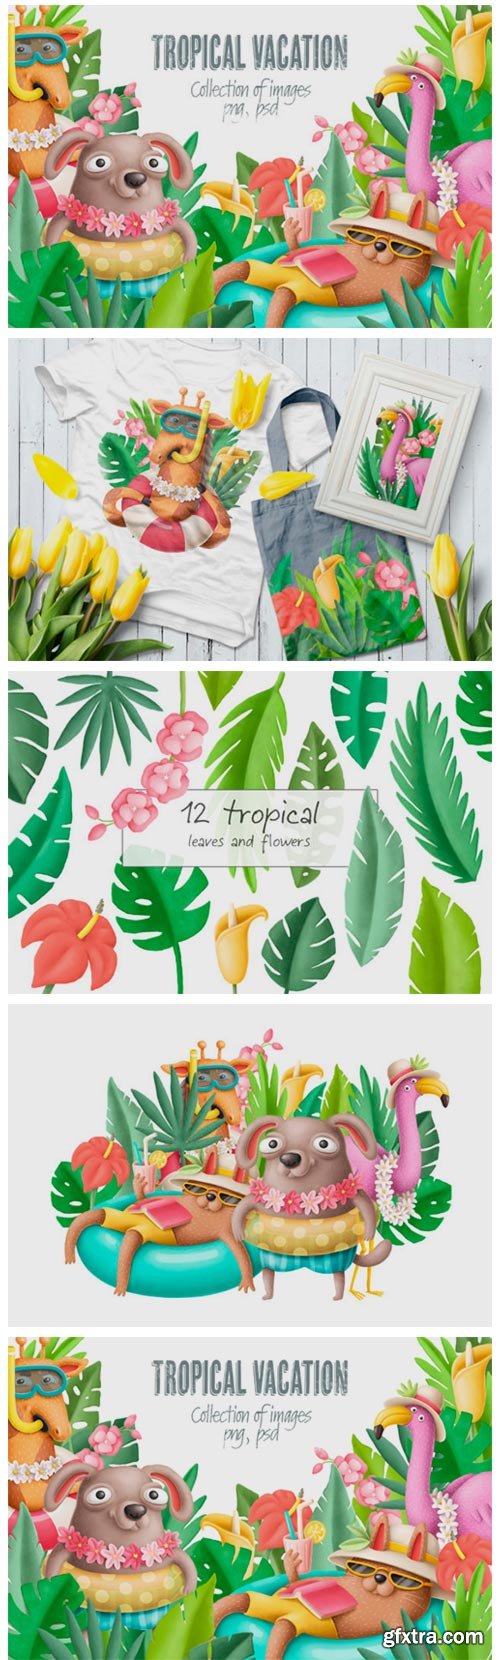 Tropical Vacation Clipart 2363302